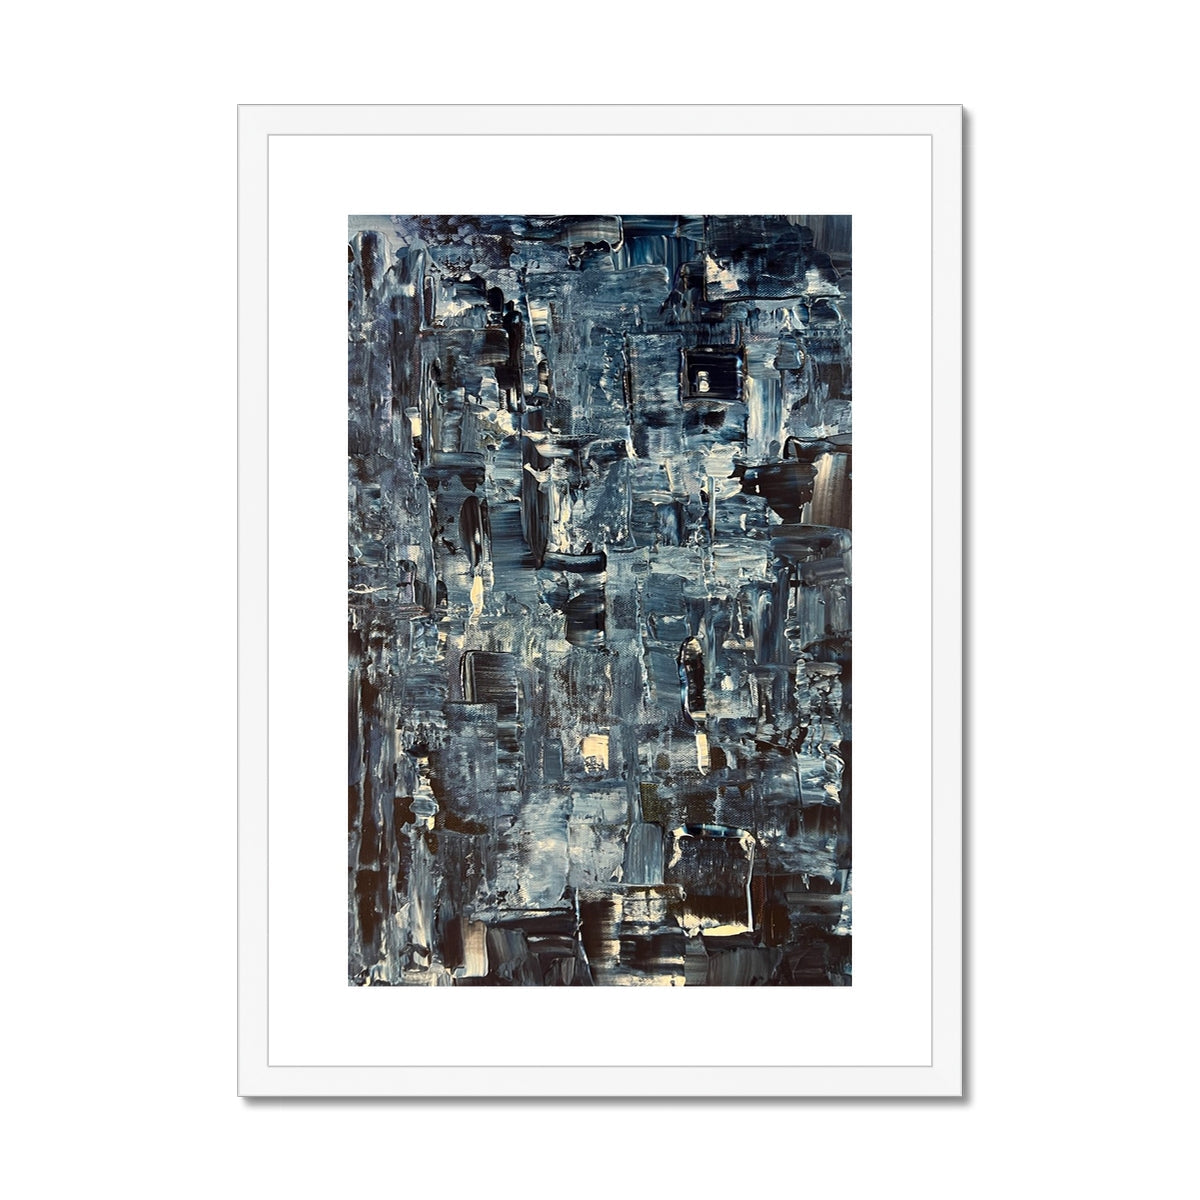 Inception Abstract Painting | Framed & Mounted Prints From Scotland-Framed & Mounted Prints-Abstract & Impressionistic Art Gallery-A2 Portrait-White Frame-Paintings, Prints, Homeware, Art Gifts From Scotland By Scottish Artist Kevin Hunter